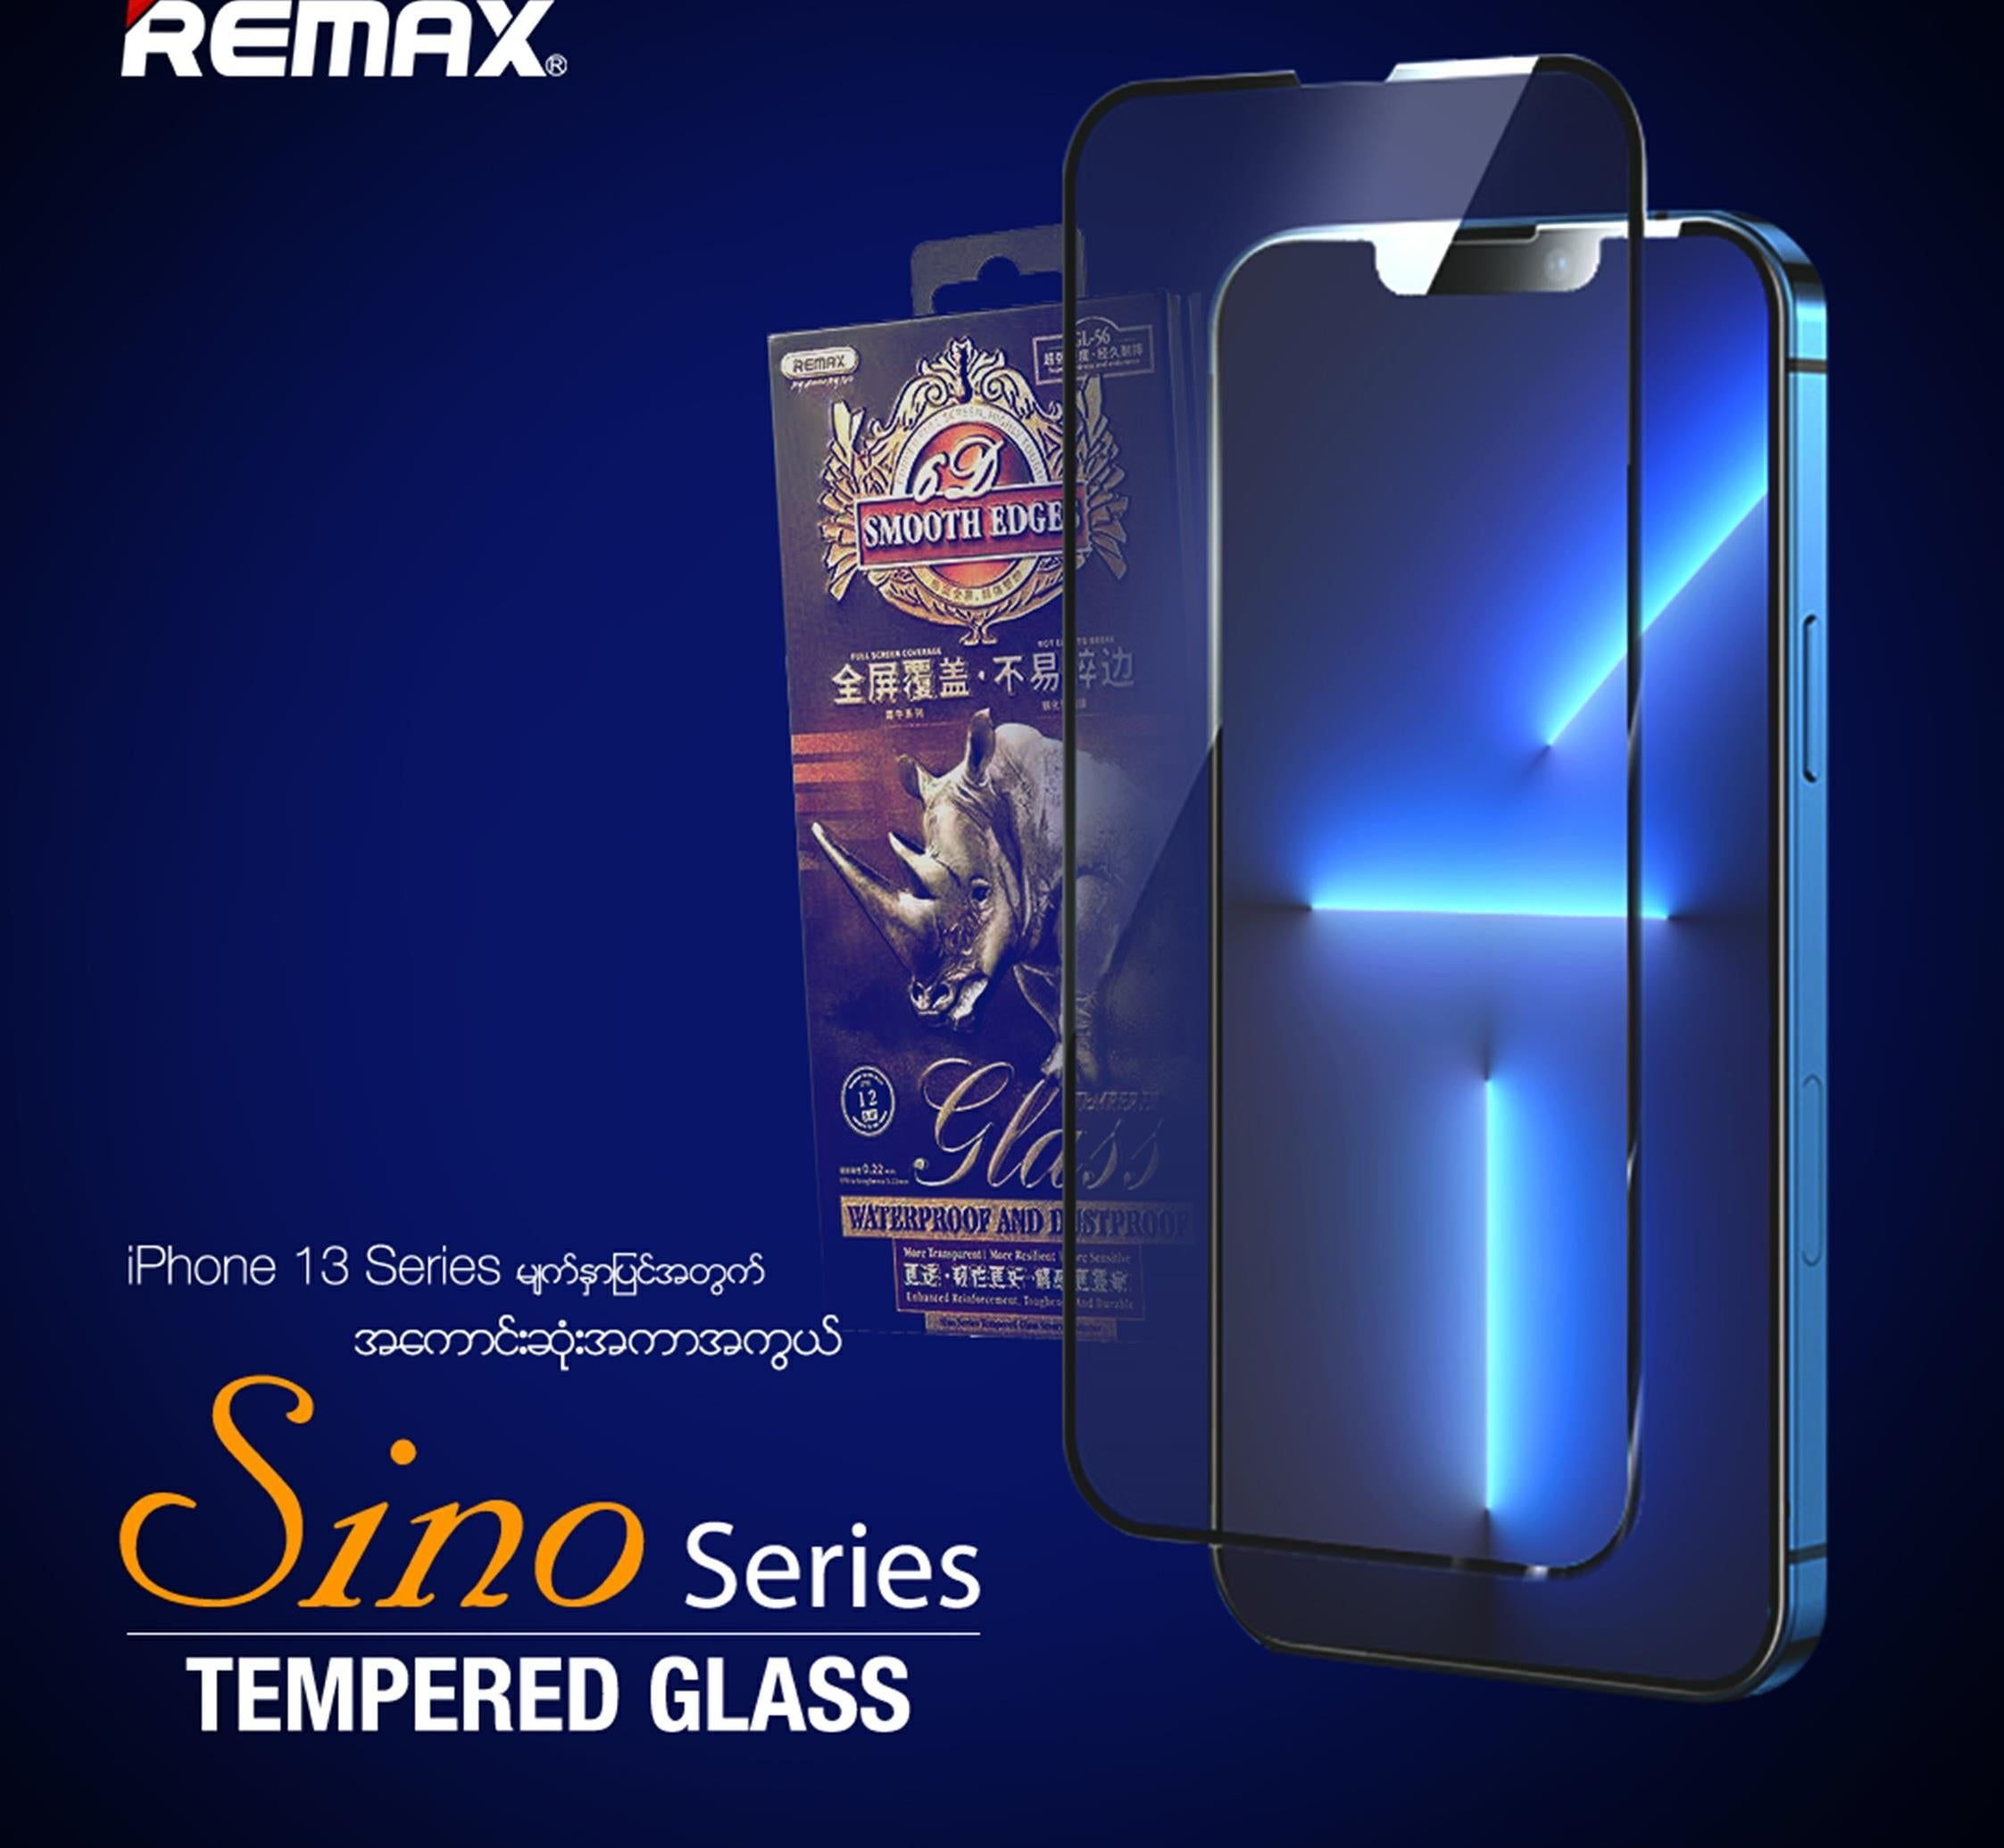 Remax iPhone 13 / 13 Pro Tempered Glass GL-56 IPH13  SINO SERIES SCREEN PROTECTOR TEMPERED GLASS FOR IPH 13 / 13 Pro